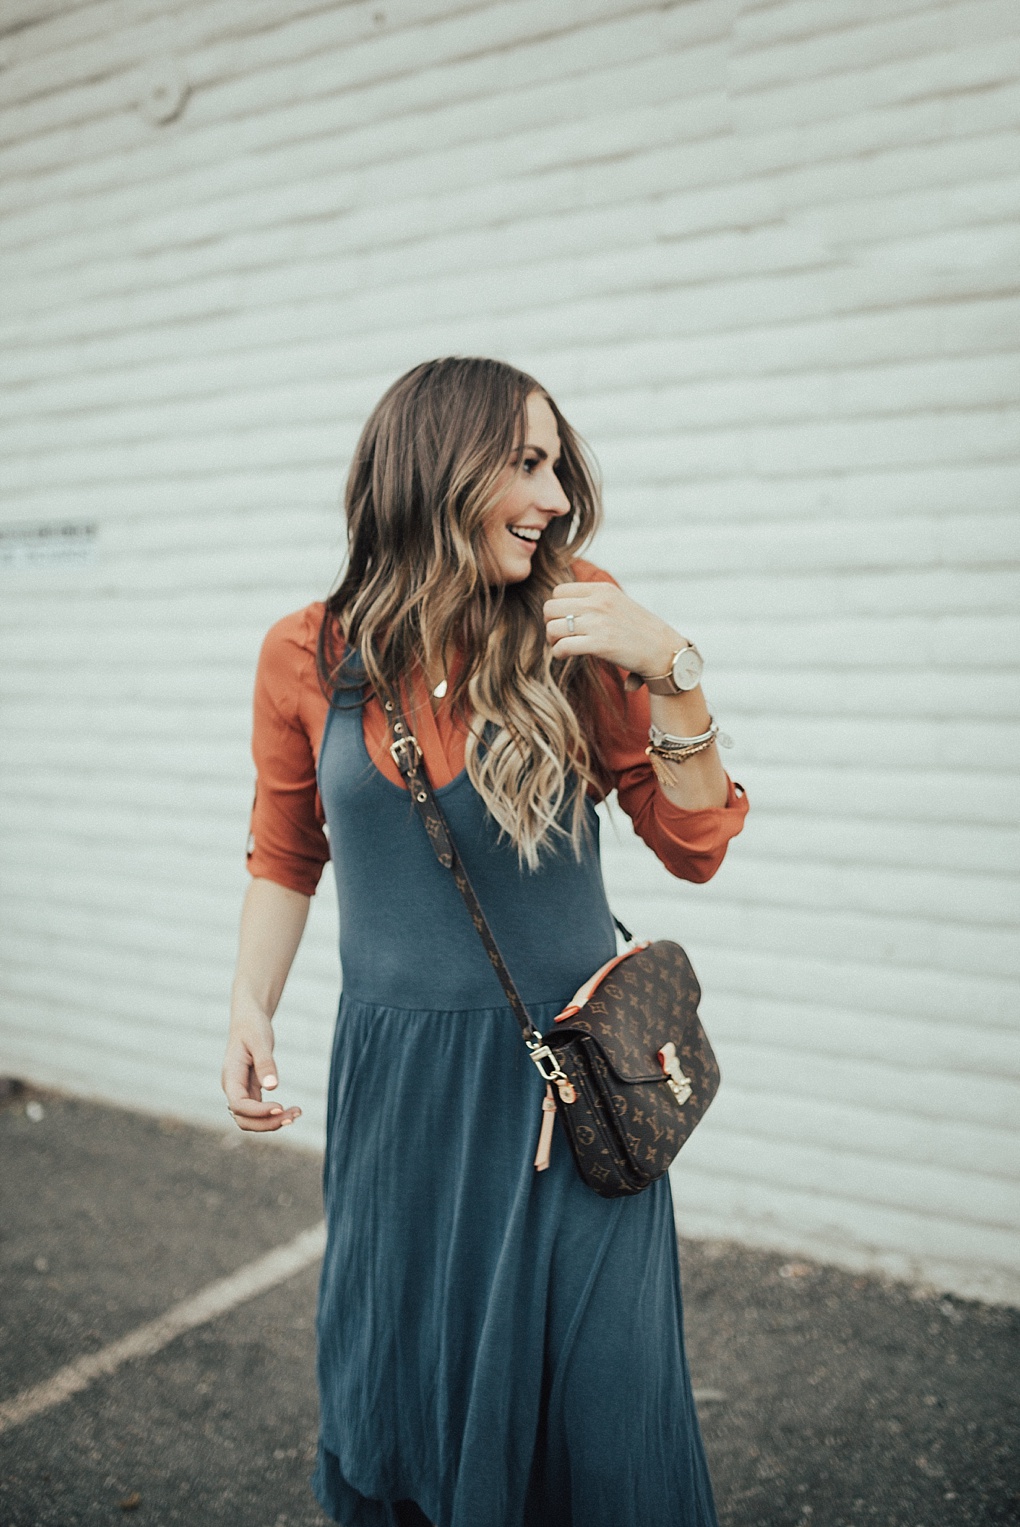 How To || Layering Clothes For Fall by Utah fashion blogger Dani Marie Blog